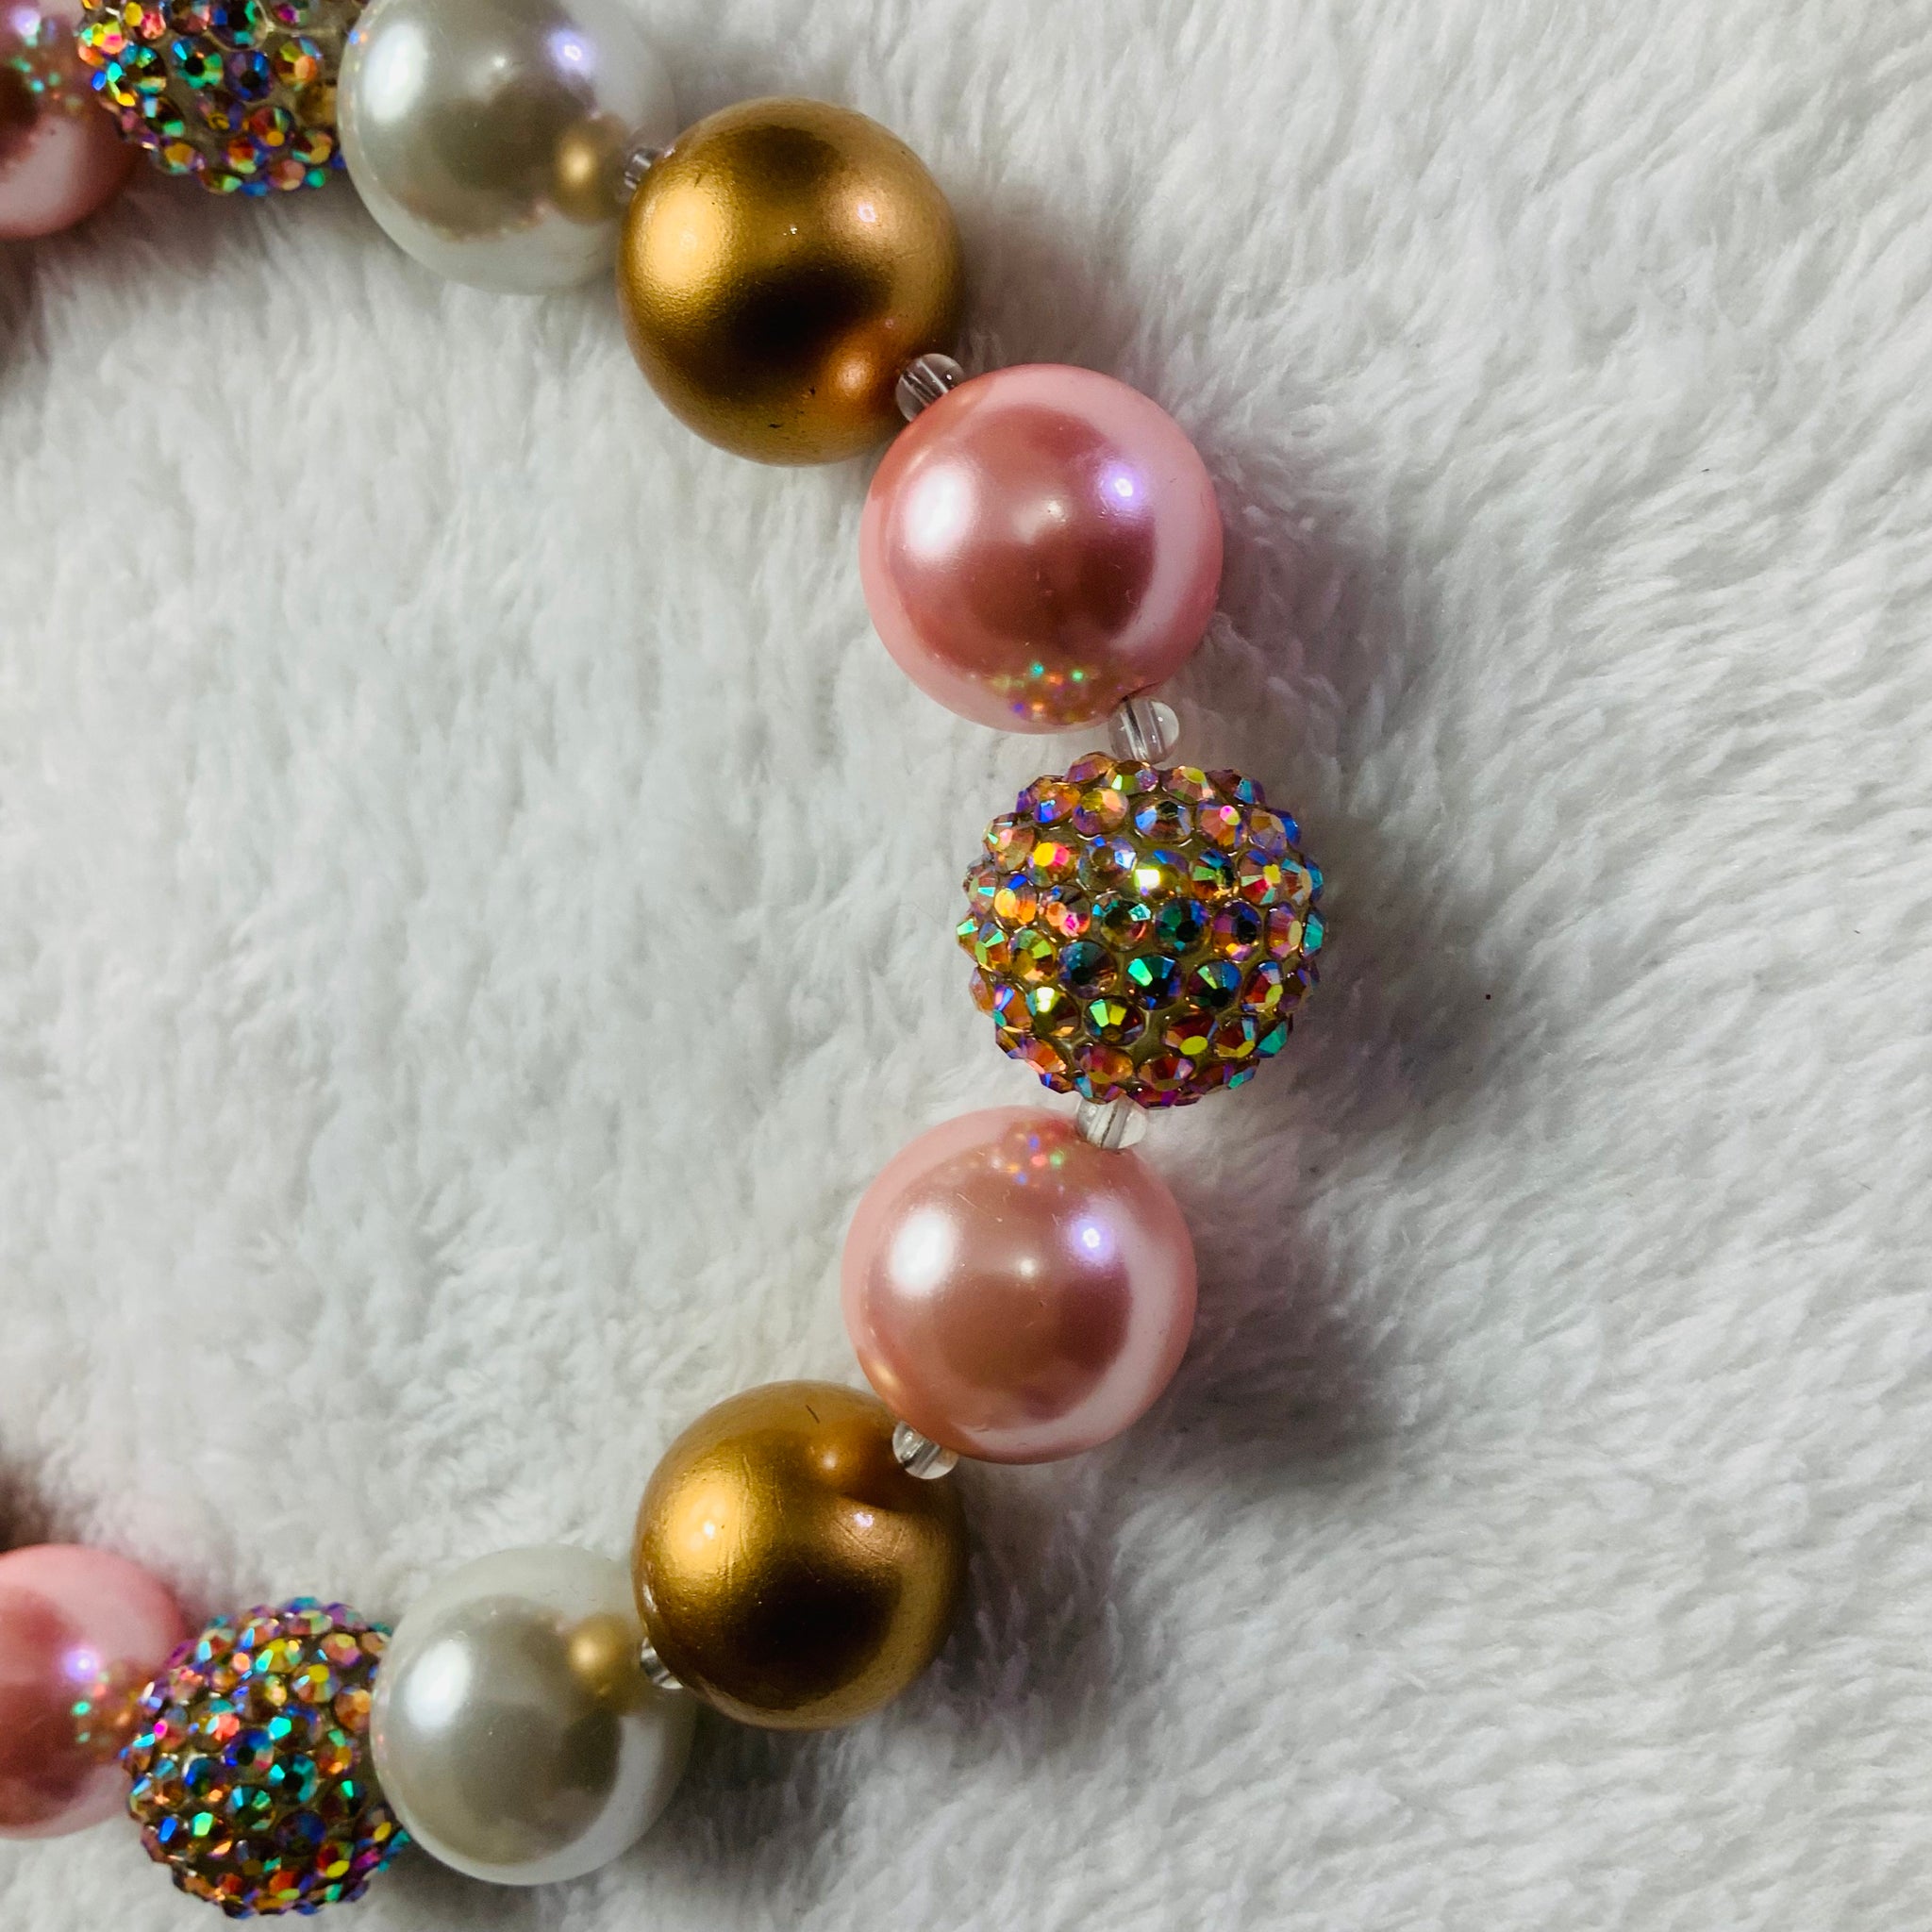 Bauble Necklace ~ Royalty by Tickled Pink Designs